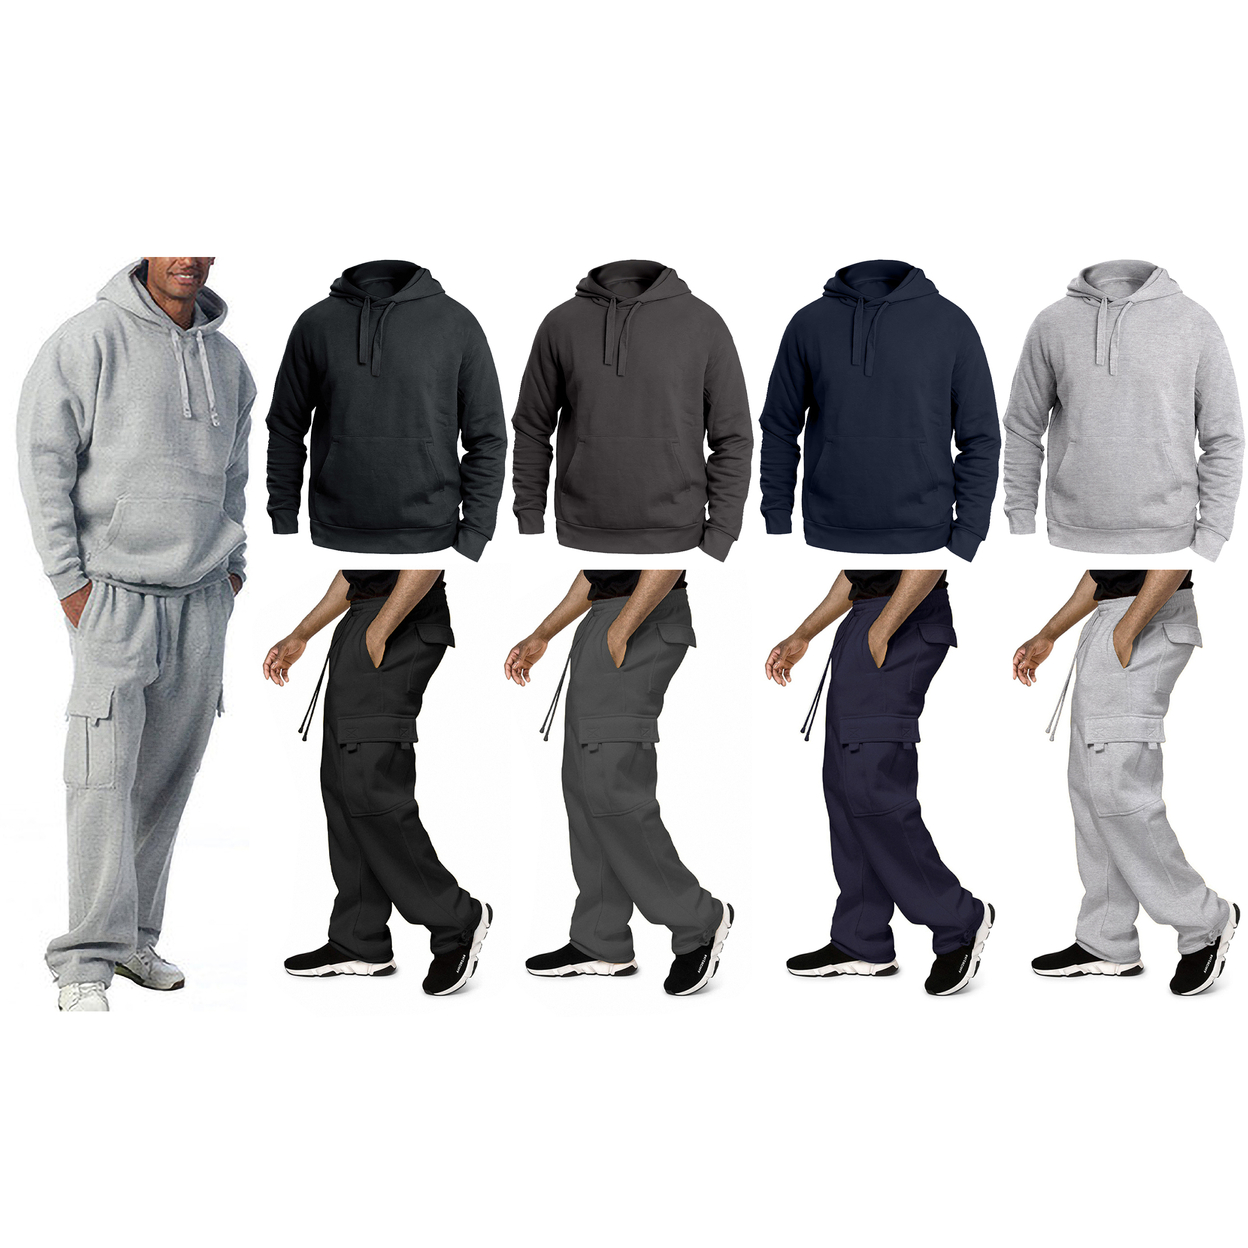 2-Pack: Men's Big & Tall Winter Warm Cozy Athletic Fleece Lined Multi-Pocket Cargo Sweatsuit - Charcoal, X-large